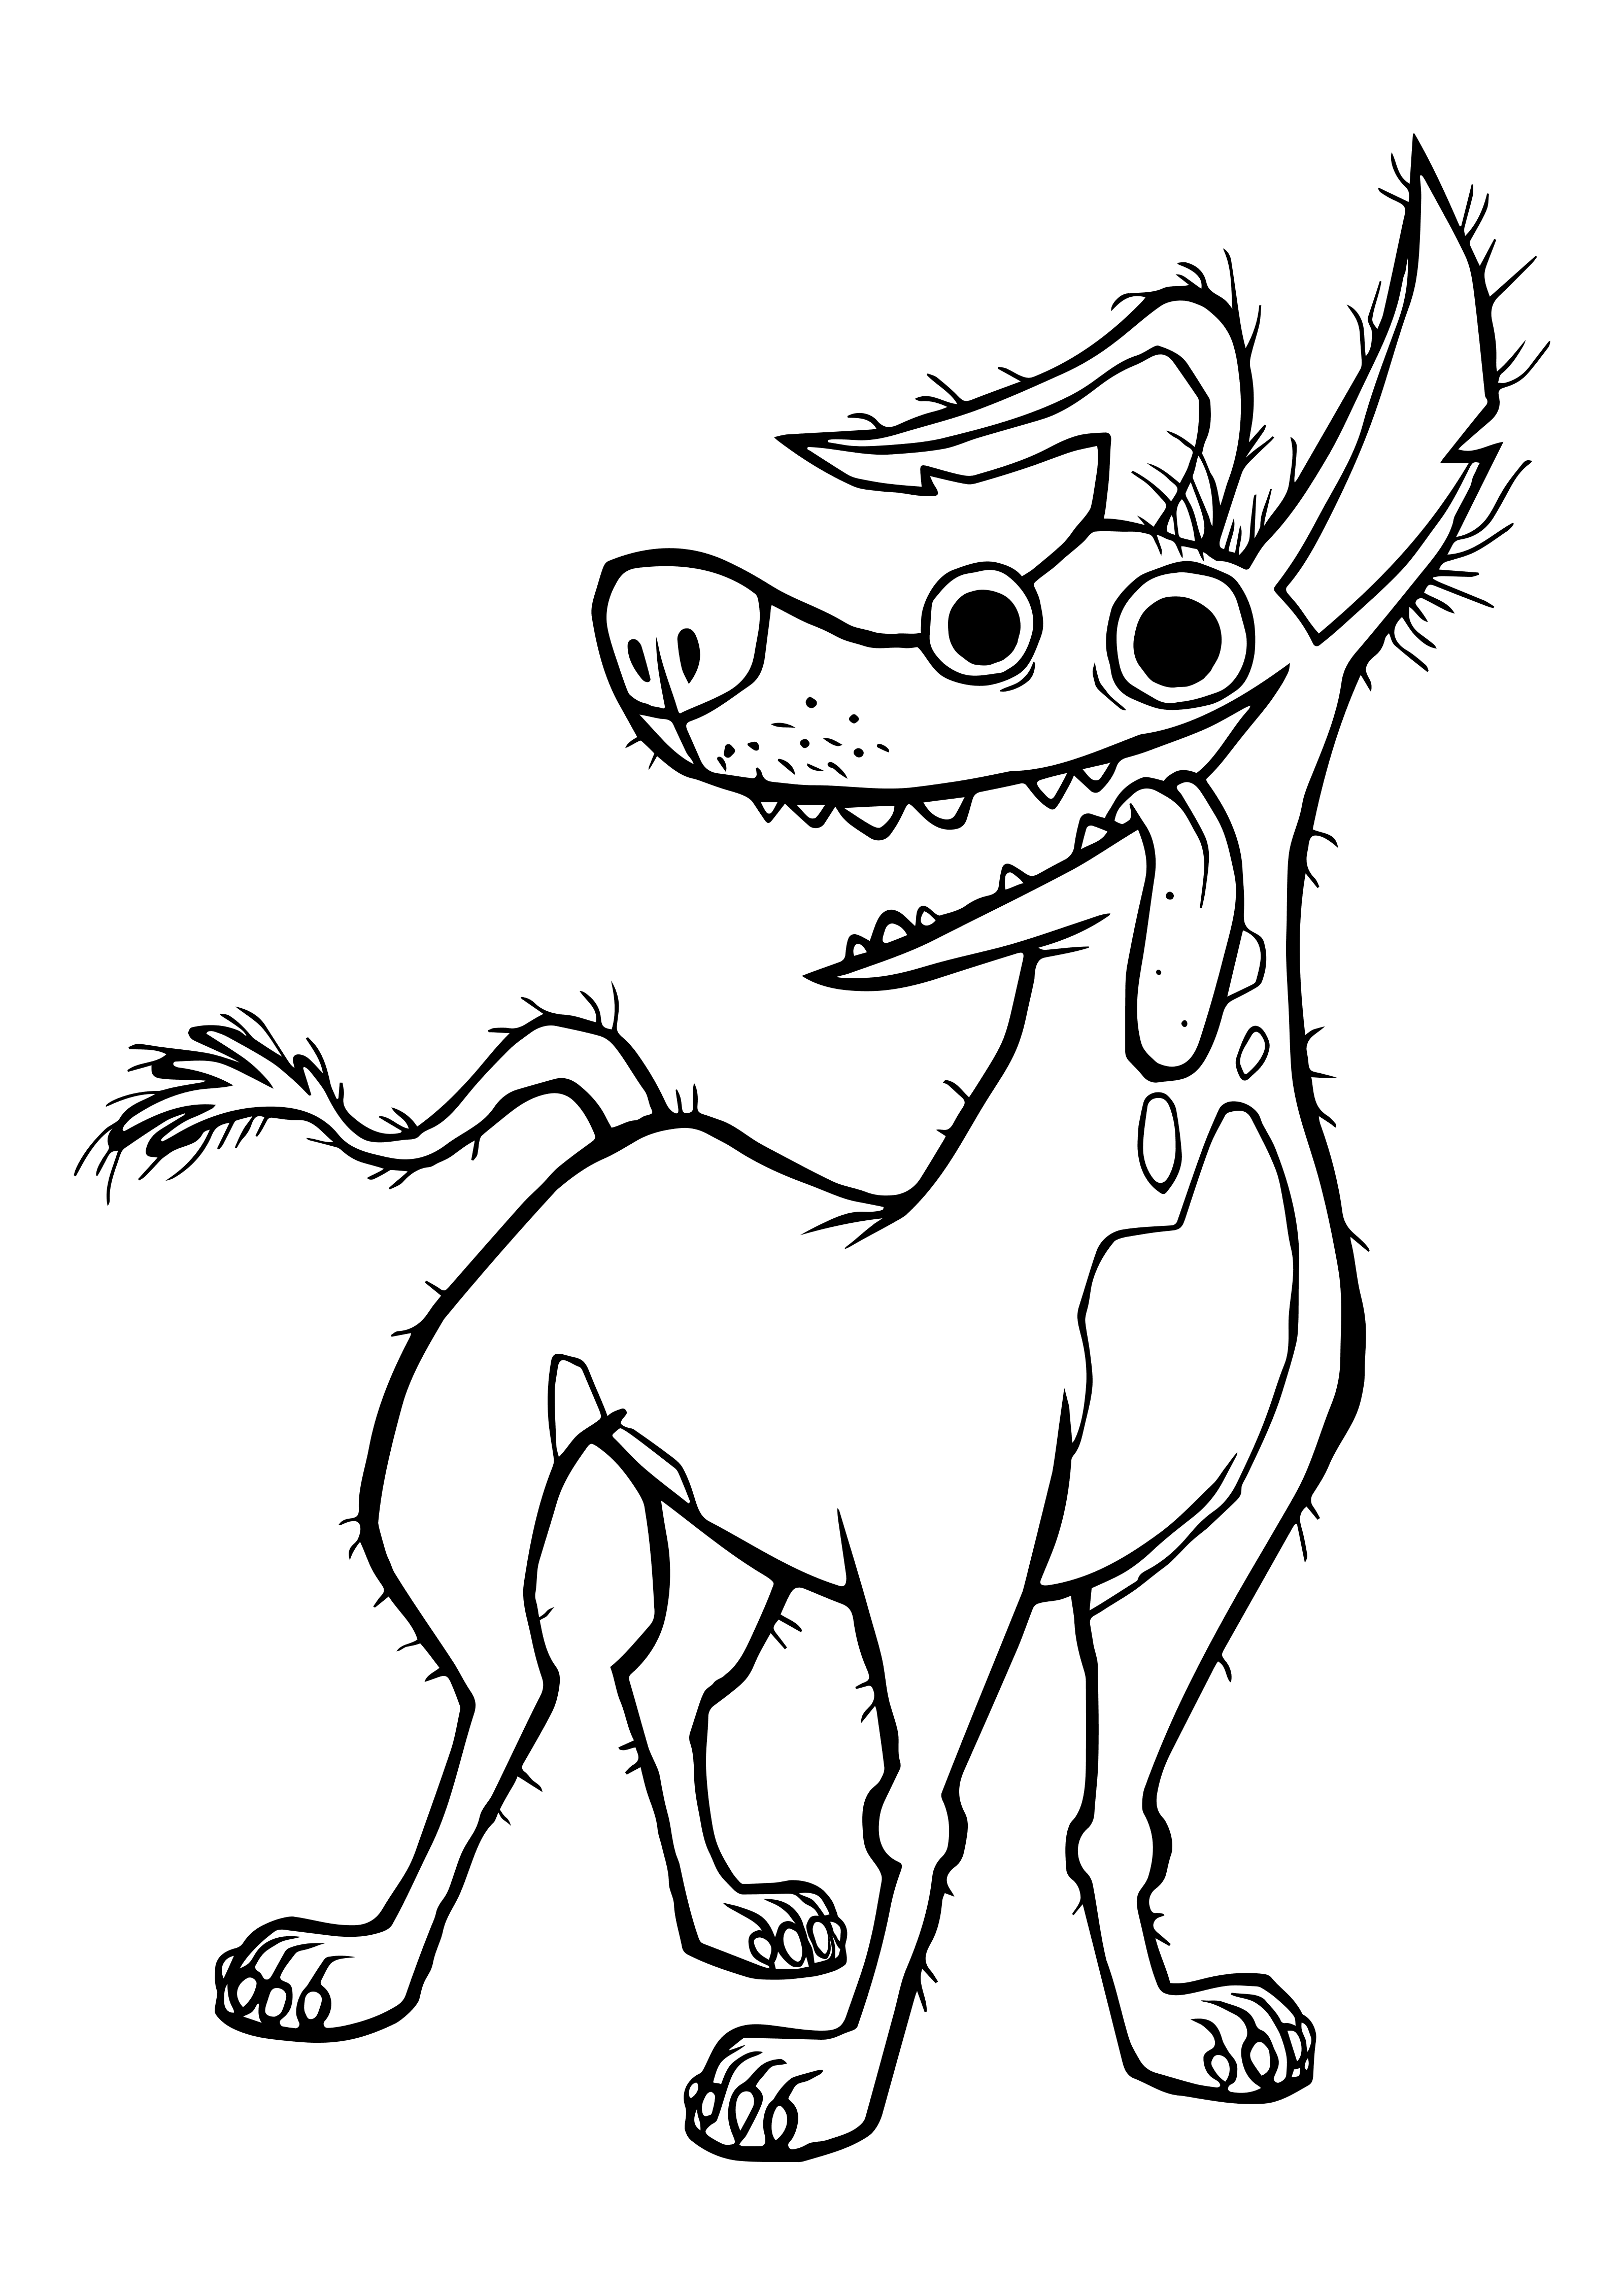 coco-coloring-pages-to-download-and-print-for-free